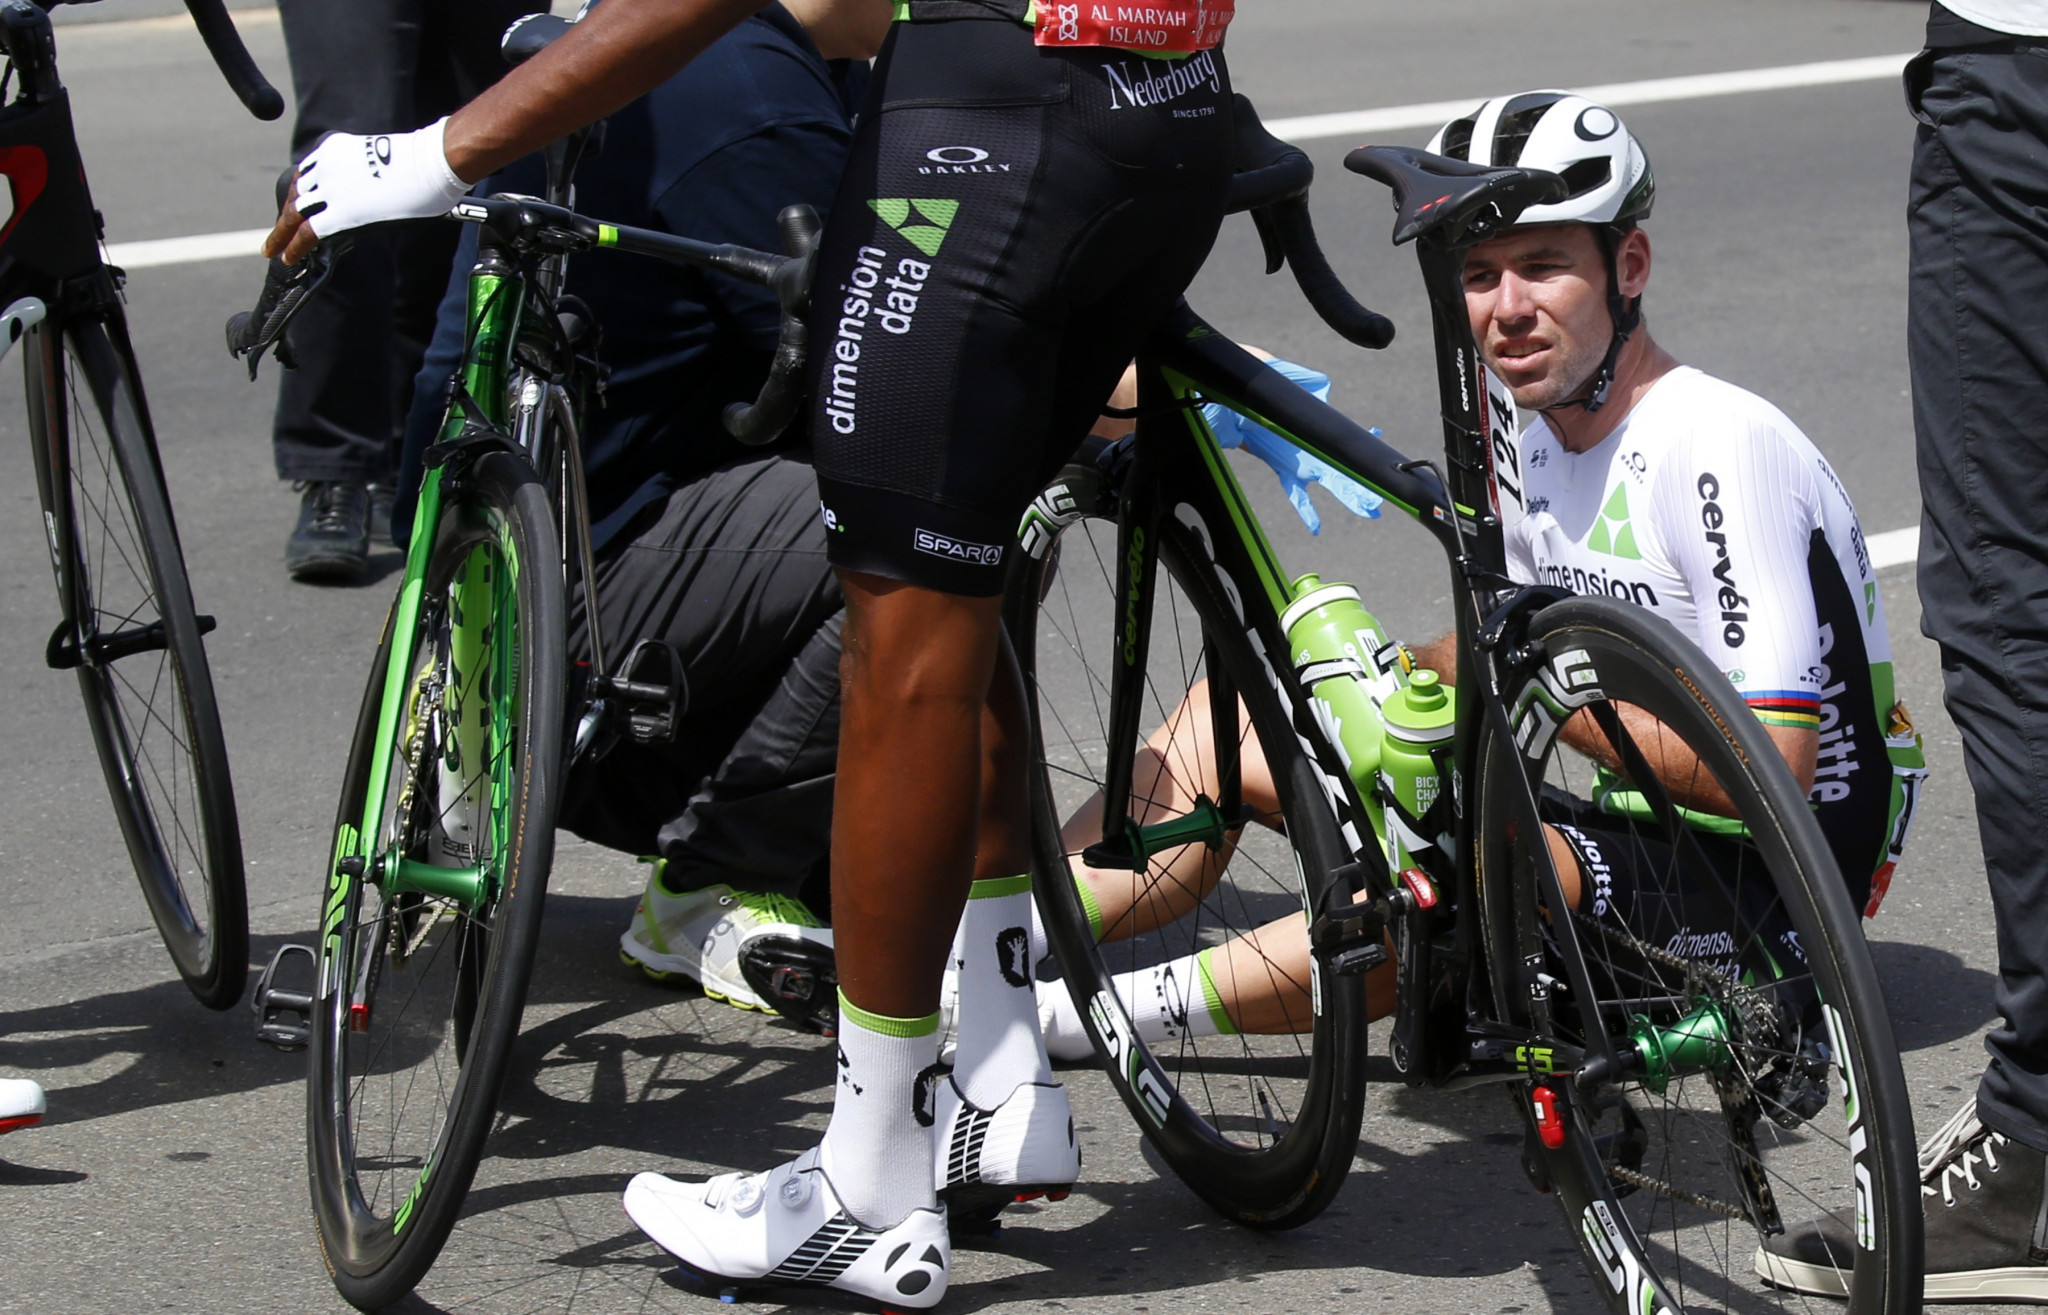 Mark Cavendish was forced to abandon after a crash ©Getty Images